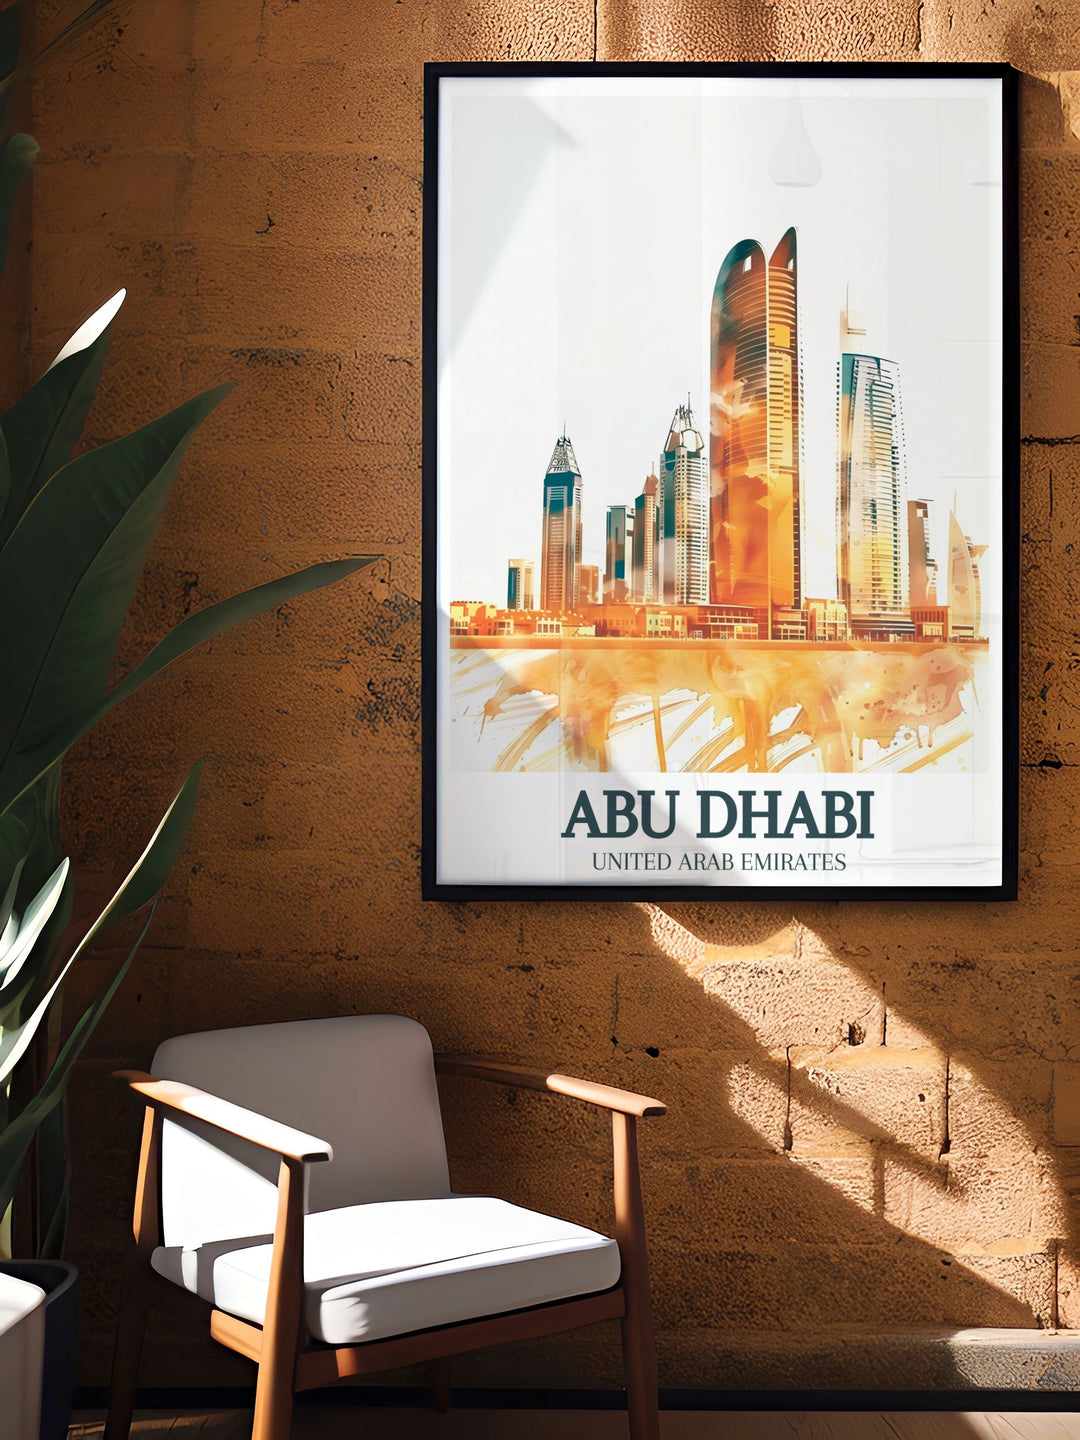 Captivating vintage print featuring the Burj Mohammed Bin Rashid in Abu Dhabi. This Emirates poster celebrates the beauty of the United Emirates and is an ideal gift for travelers and lovers of Middle Eastern culture.